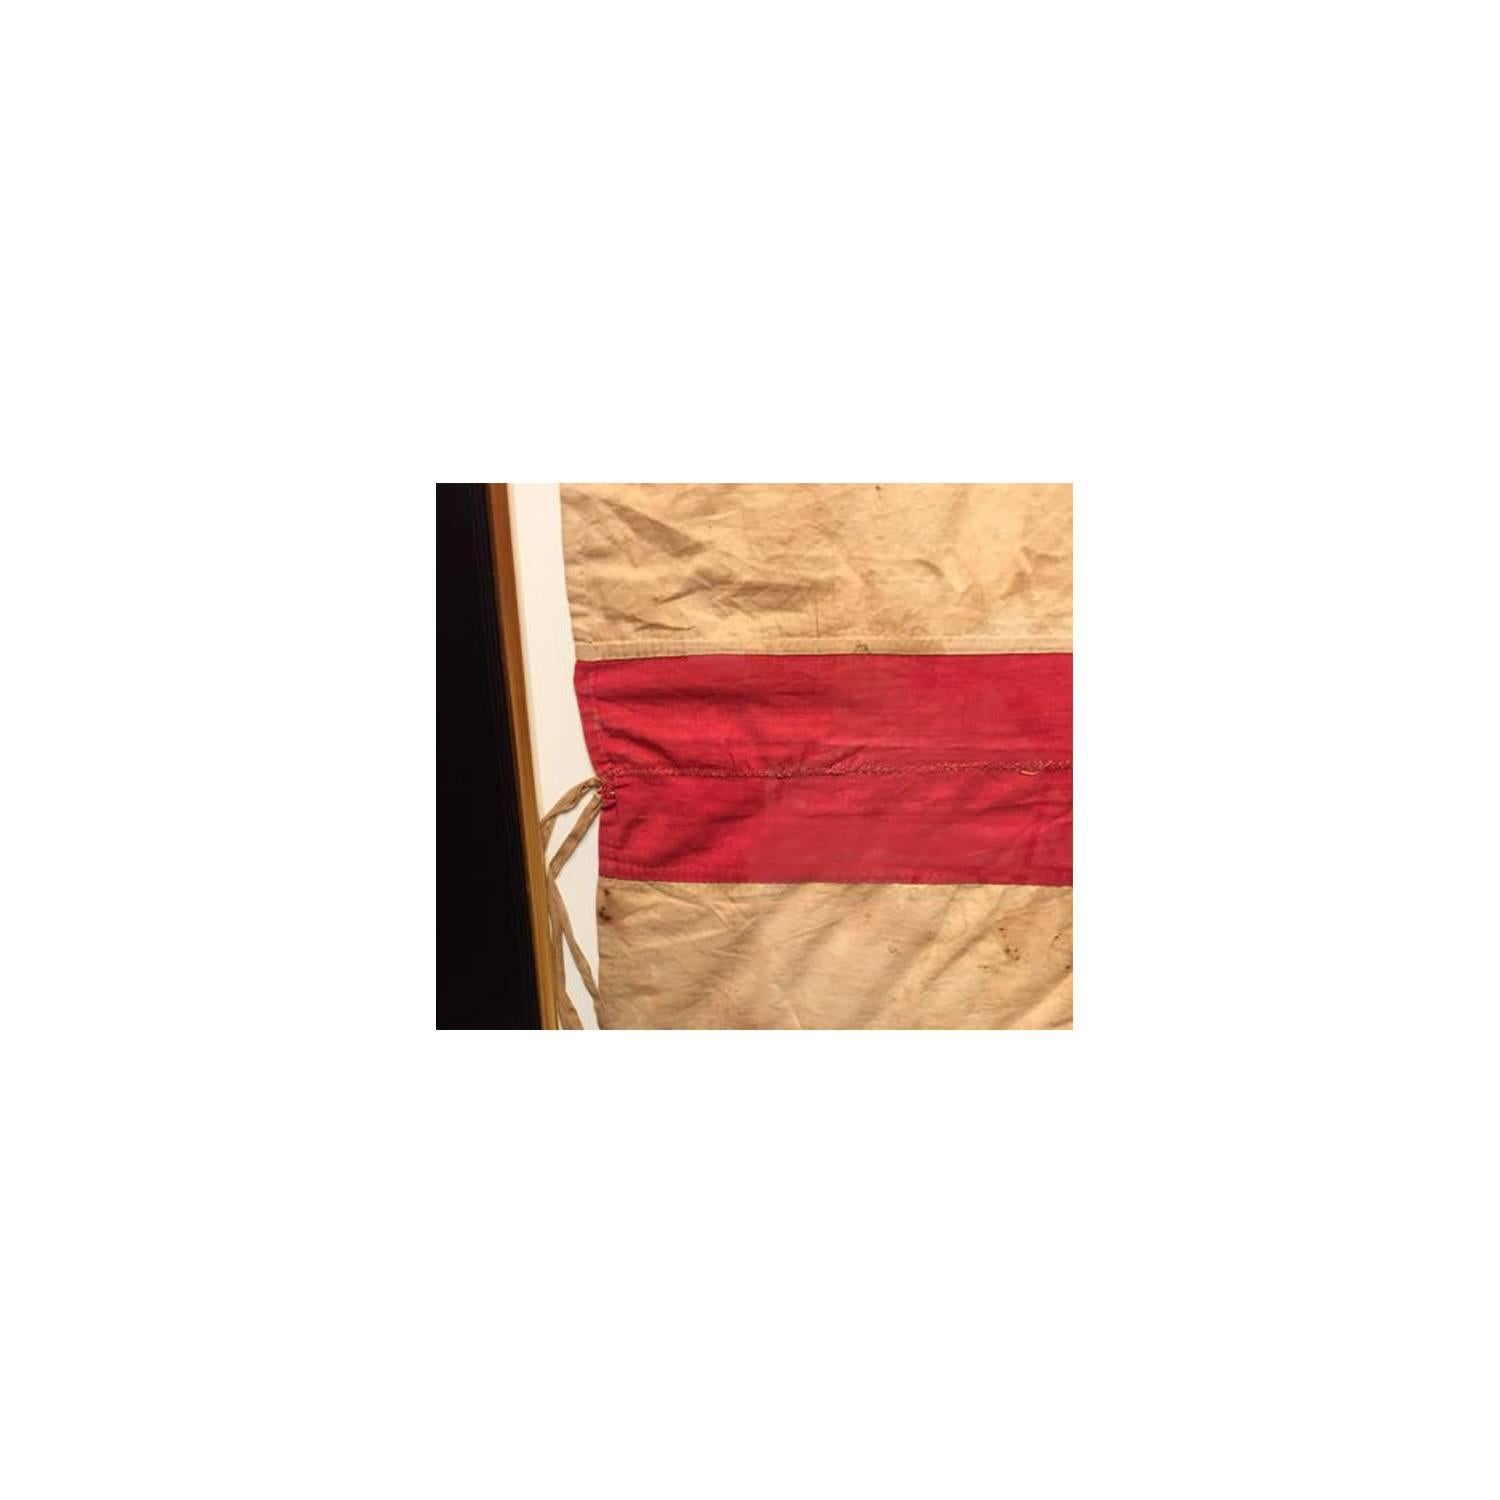 American Antique Hand Sewn 31 Star Flag, Rare For Sale